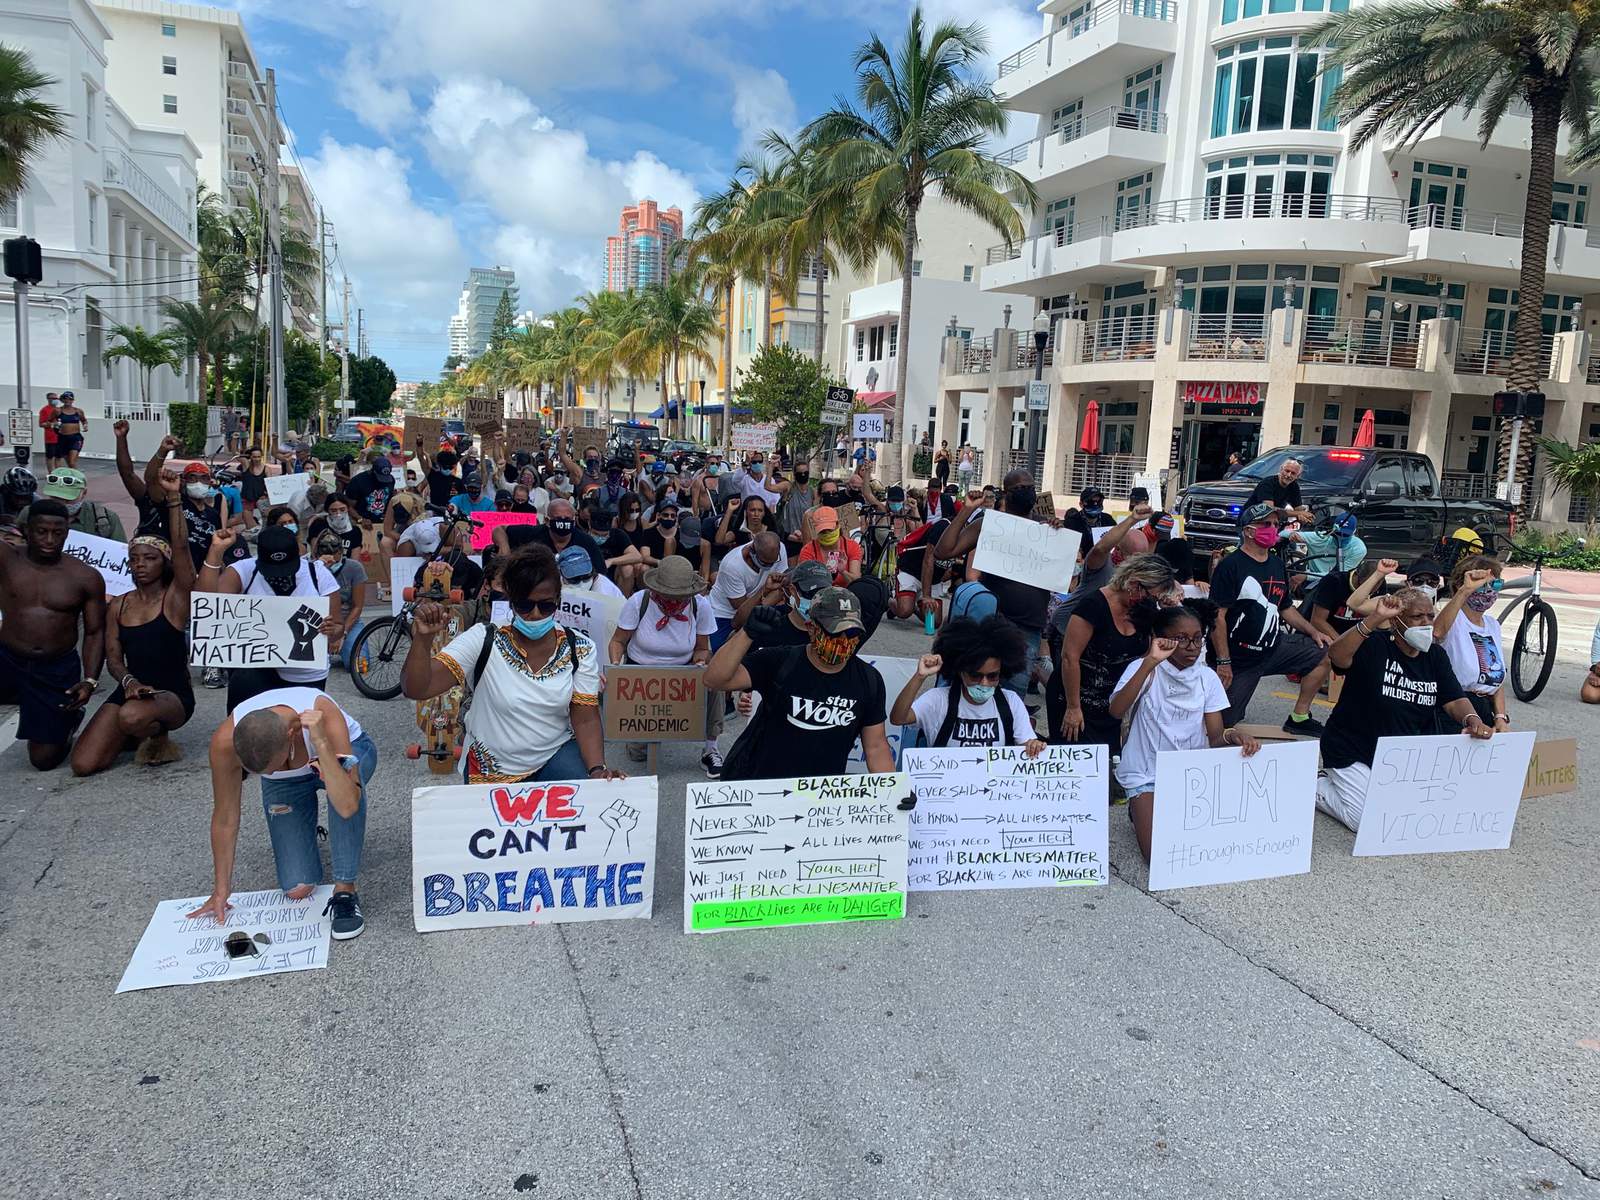 Miamis Black officers conflicted about protests, loyalties